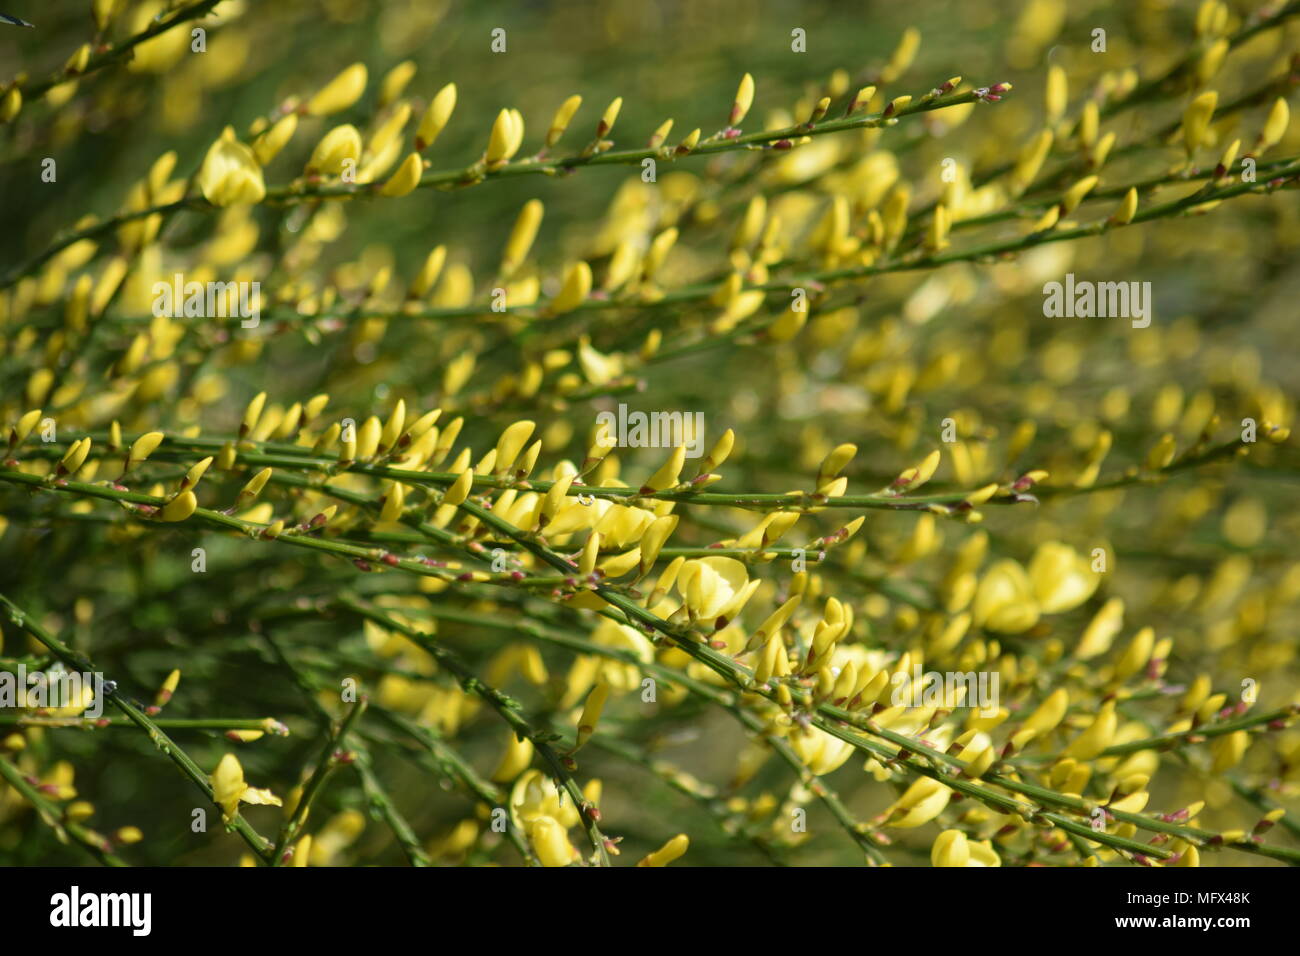 SPRING FLOWERING GARDEN SHRUB: THE YELLOW FLOWER OF BROOM IN APRIL. WEST SUSSEX. 2018 Stock Photo